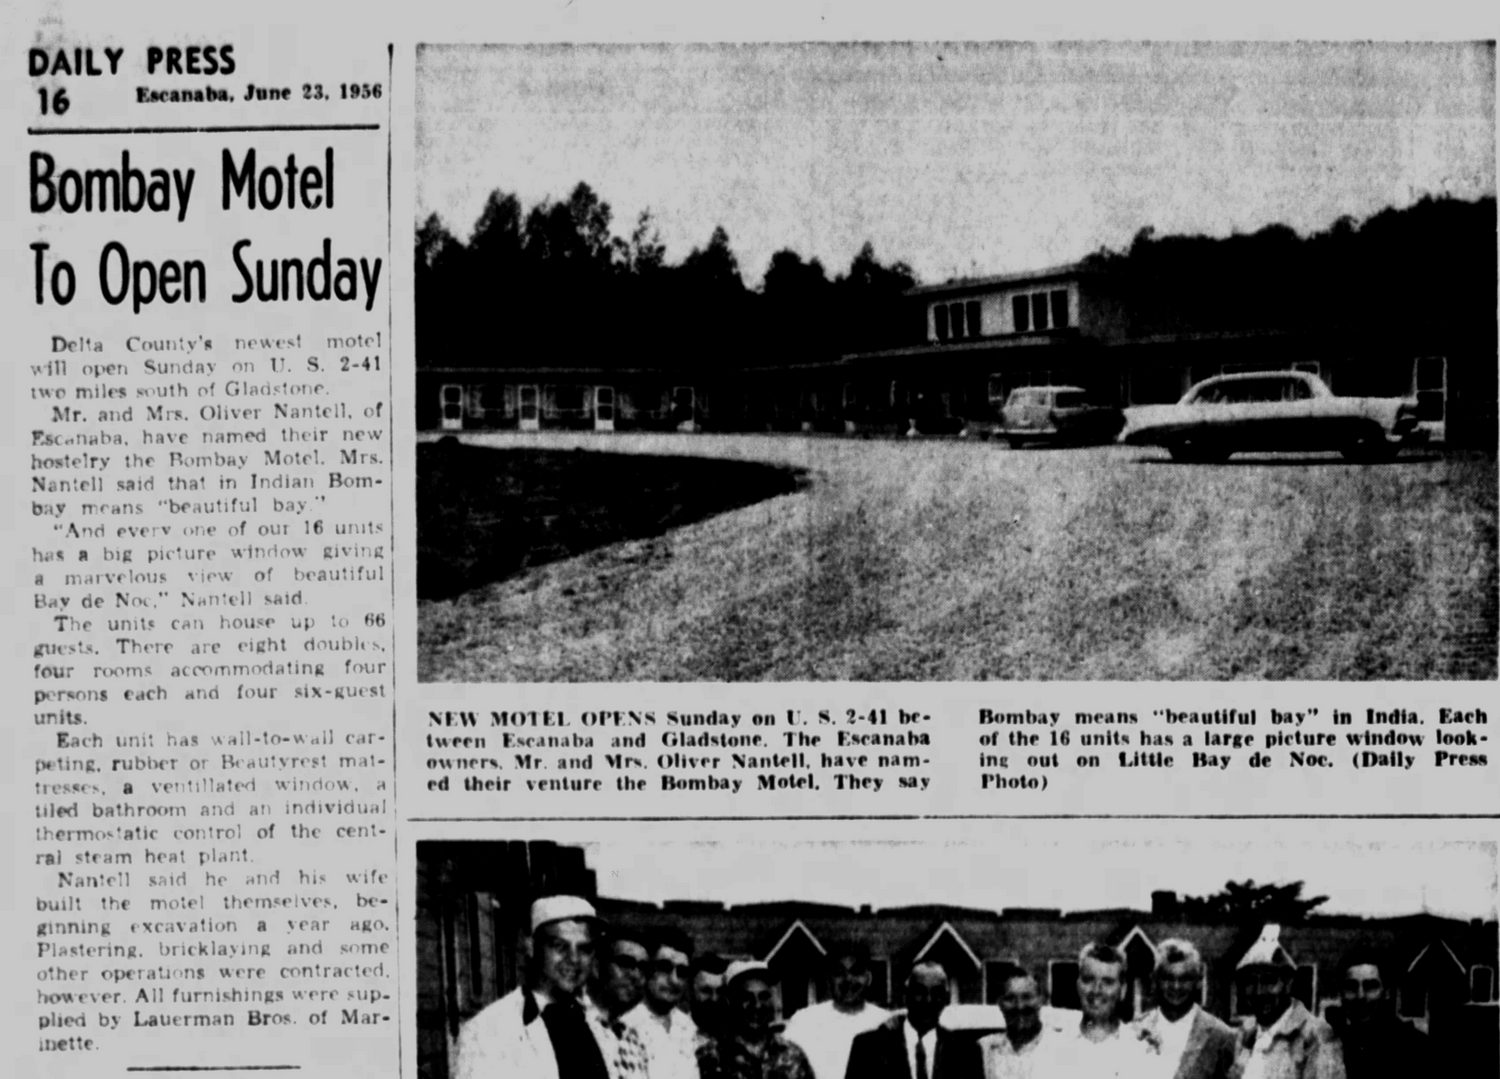 Bombay Motel - June 23 1956 Opening Article